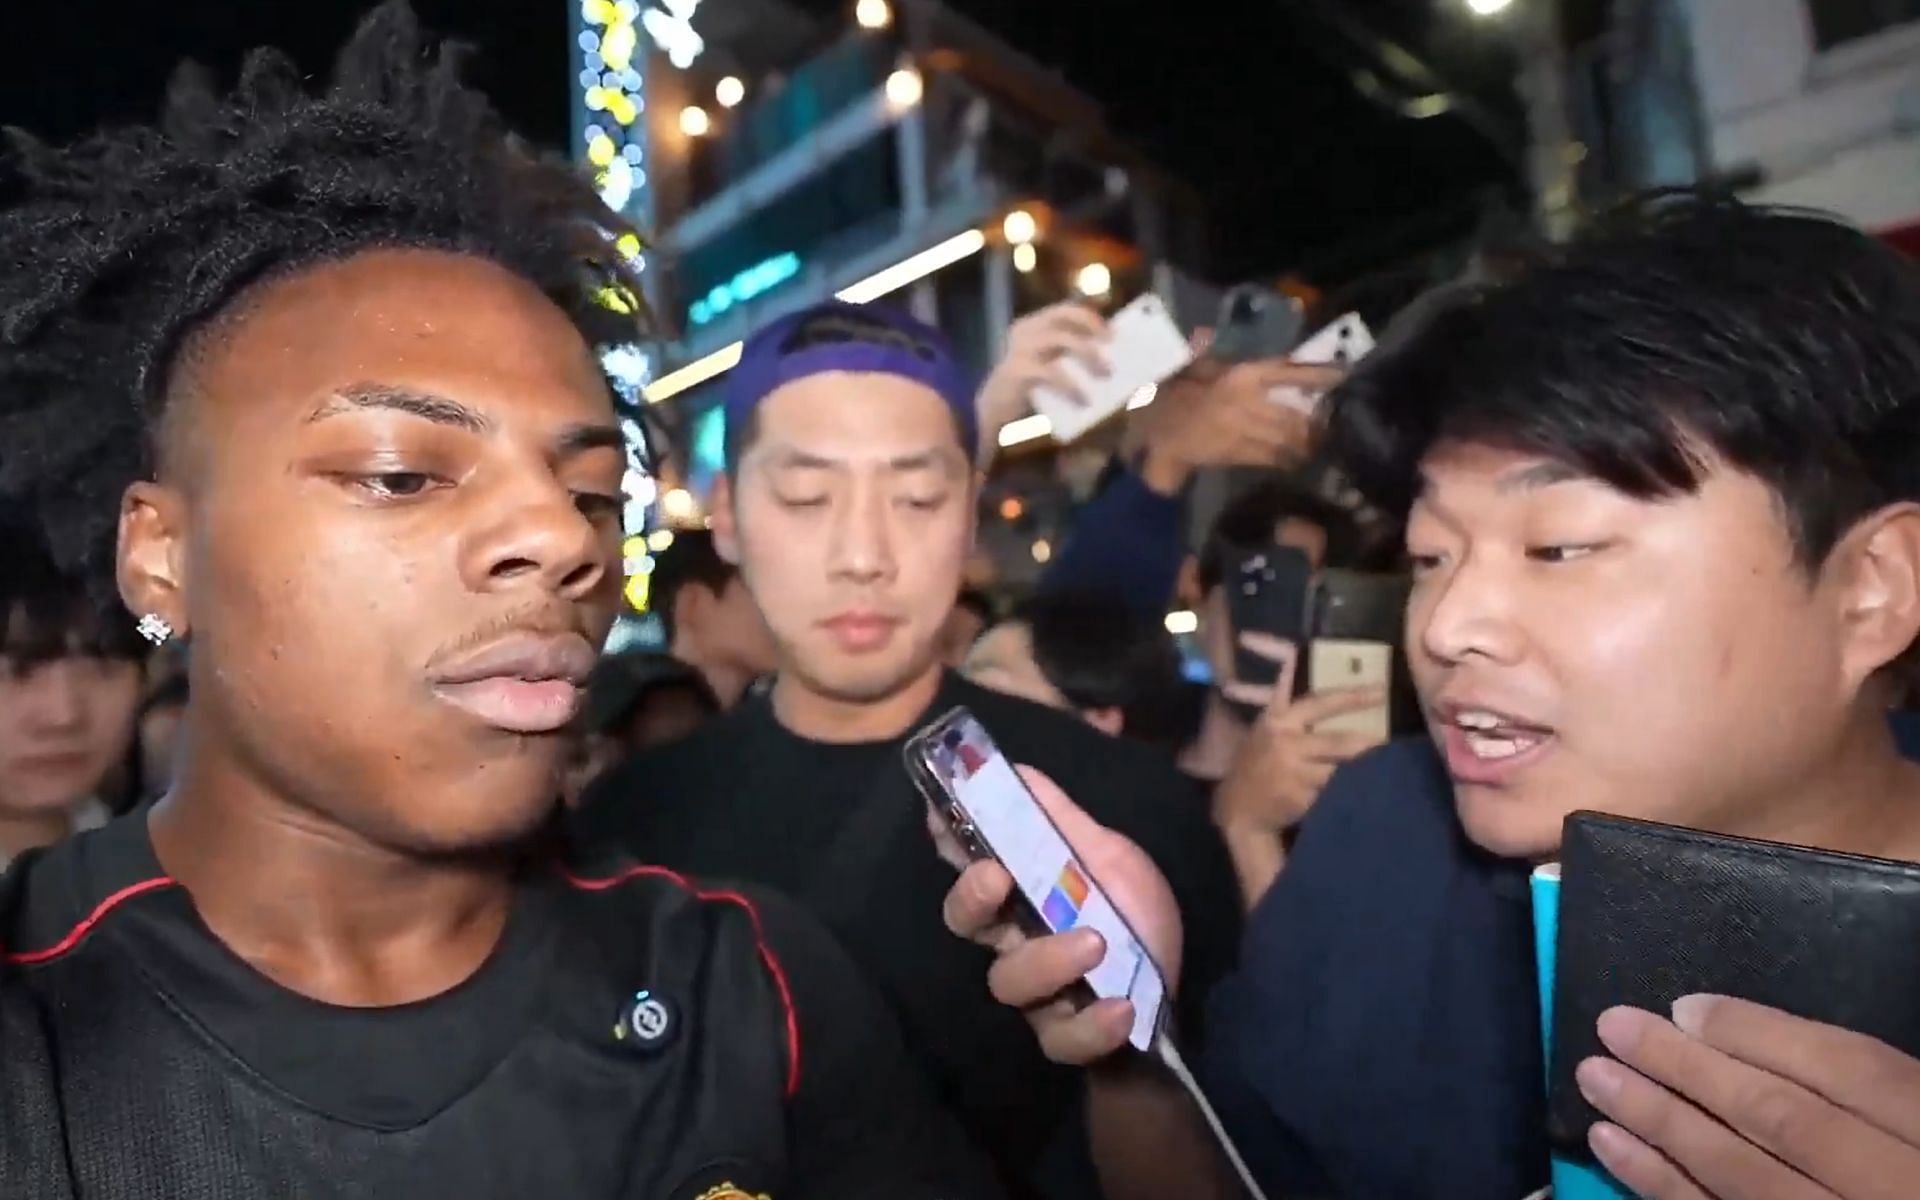 IShowSpeed confronts South Korean fan who allegedly called him the N-word